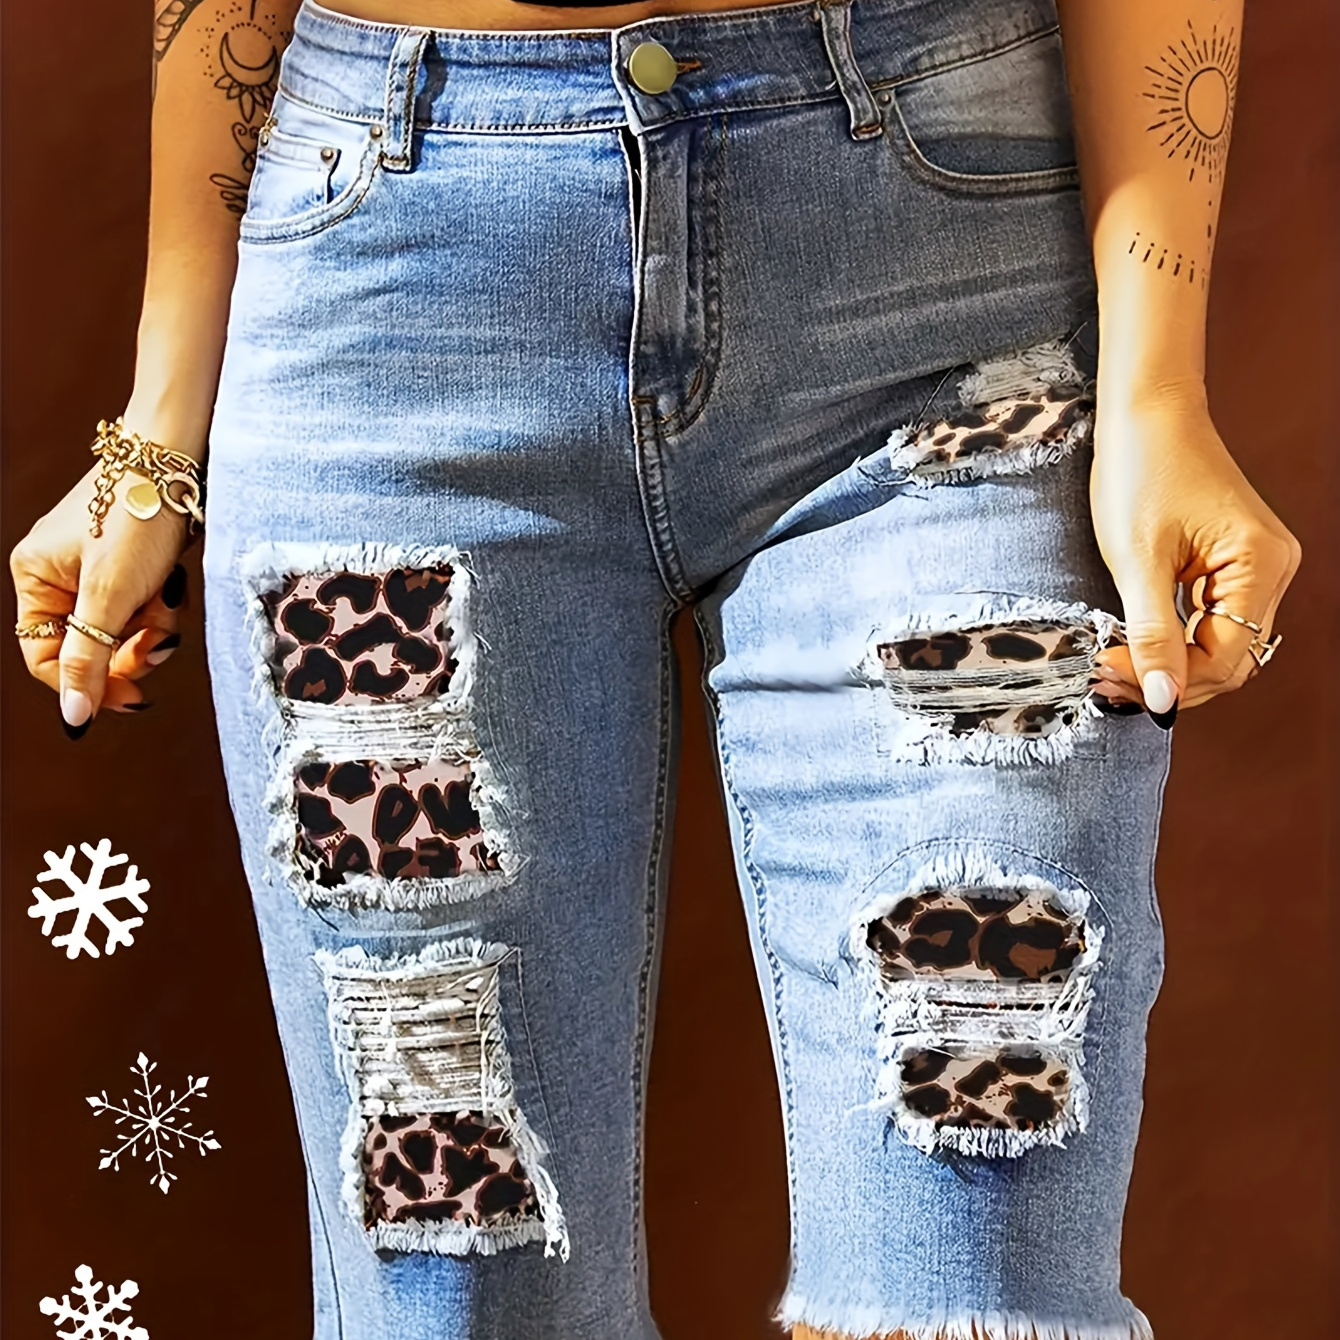 

Women's Fashion Bermuda Shorts Jeans, Casual Style, Ripped Denim With Leopard Print Patchwork, Frayed Hem, Stretch Fit